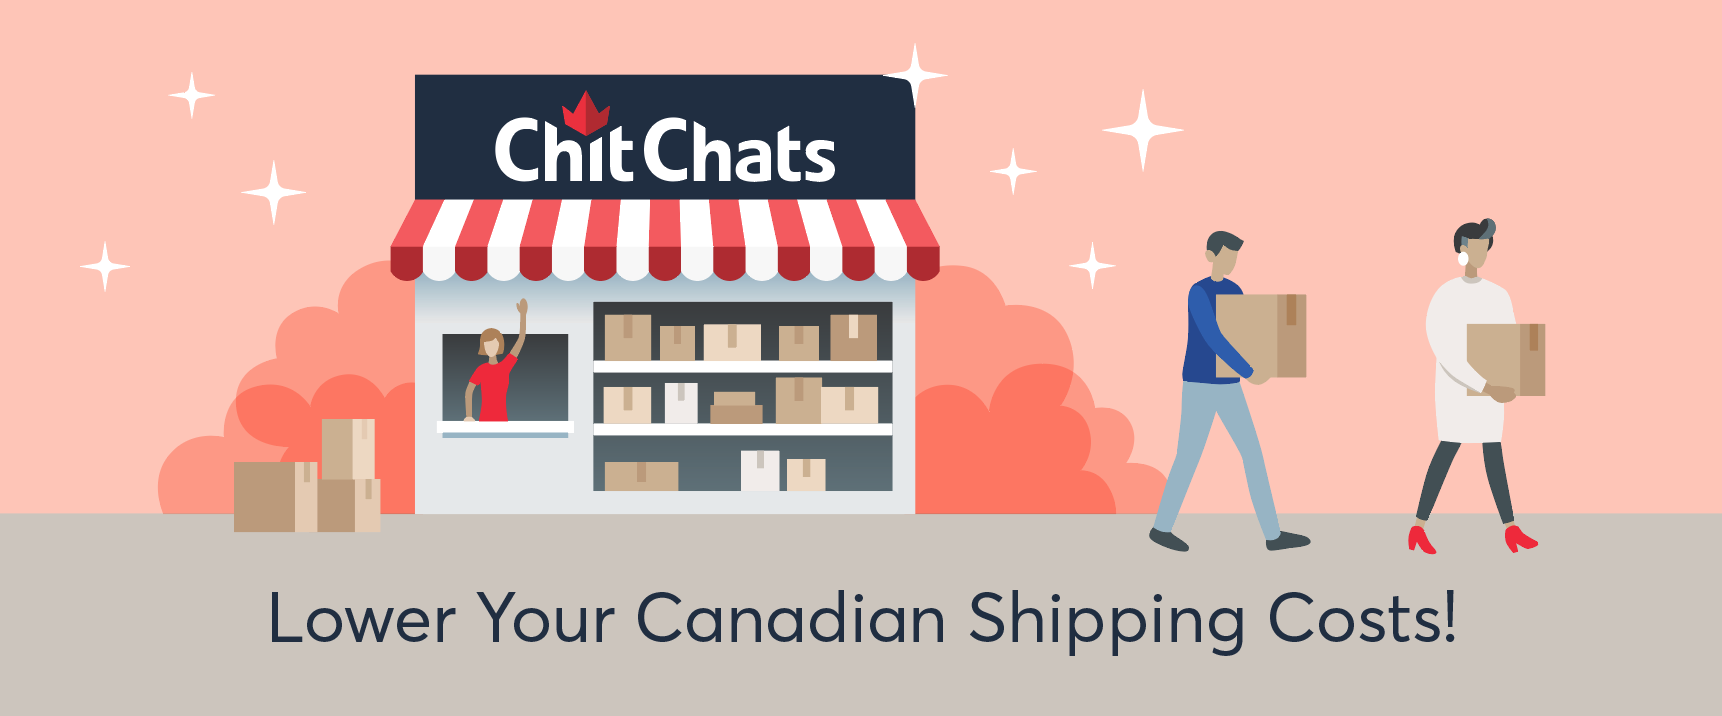 Shipping Discounts Through Chit Chats Collect